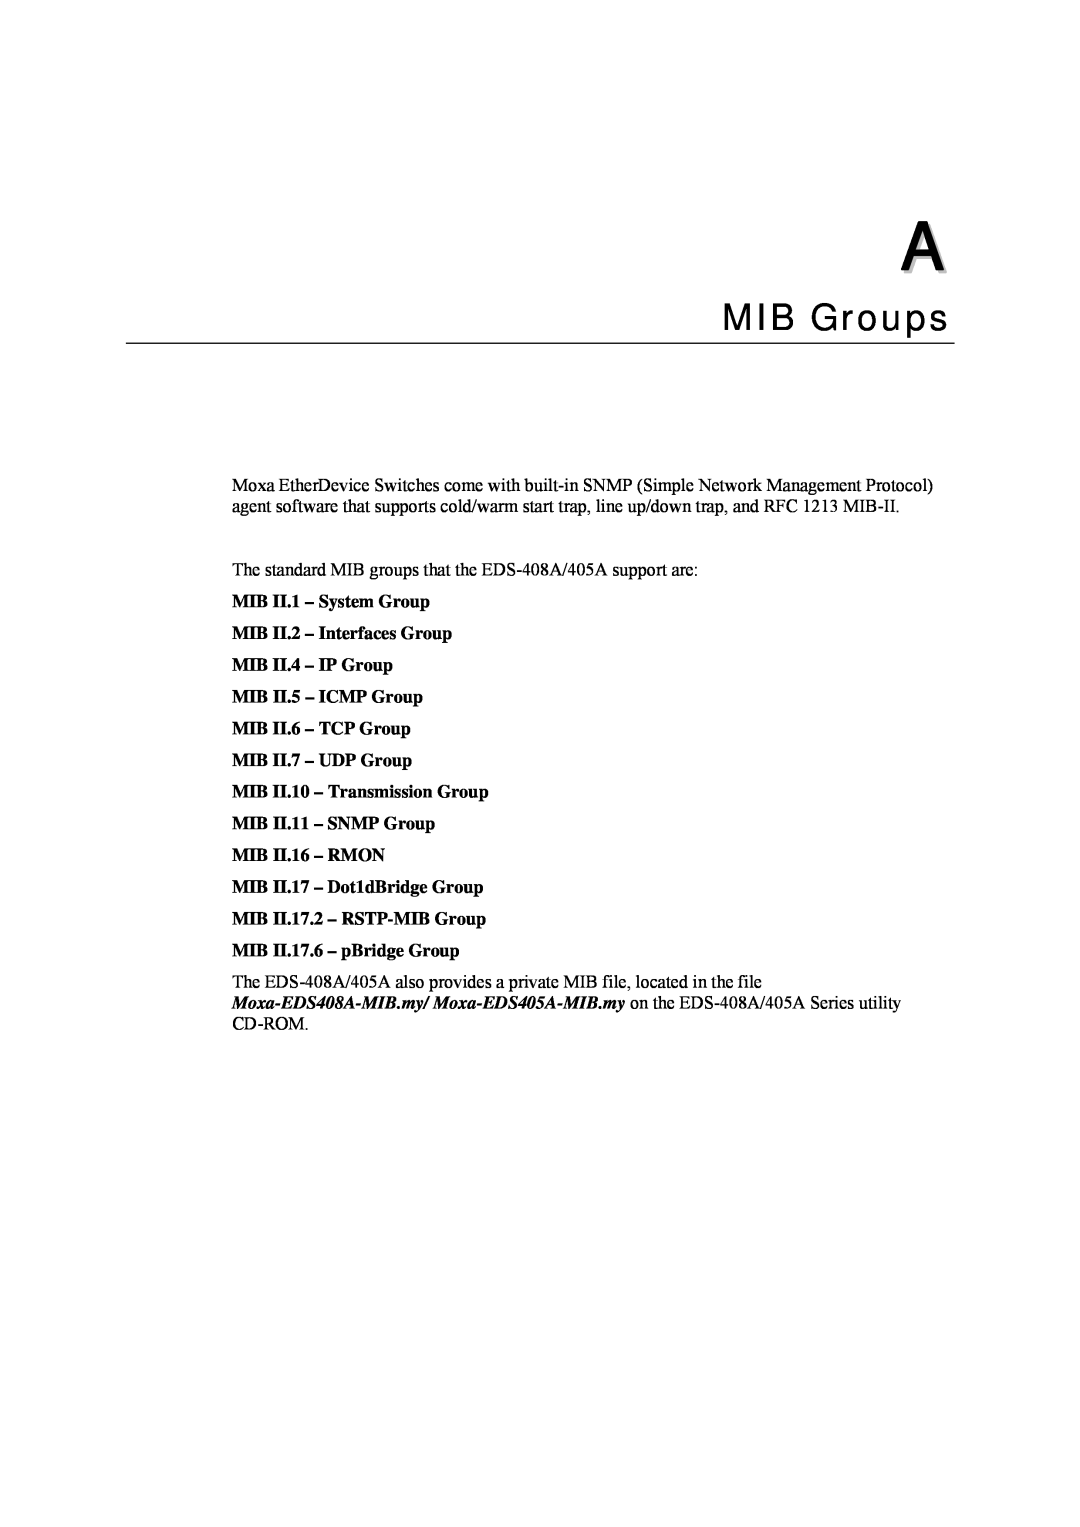 Moxa Technologies EDS-408A, EDS-405A user manual MIB Groups, MIB II.1 - System Group MIB II.2 - Interfaces Group 